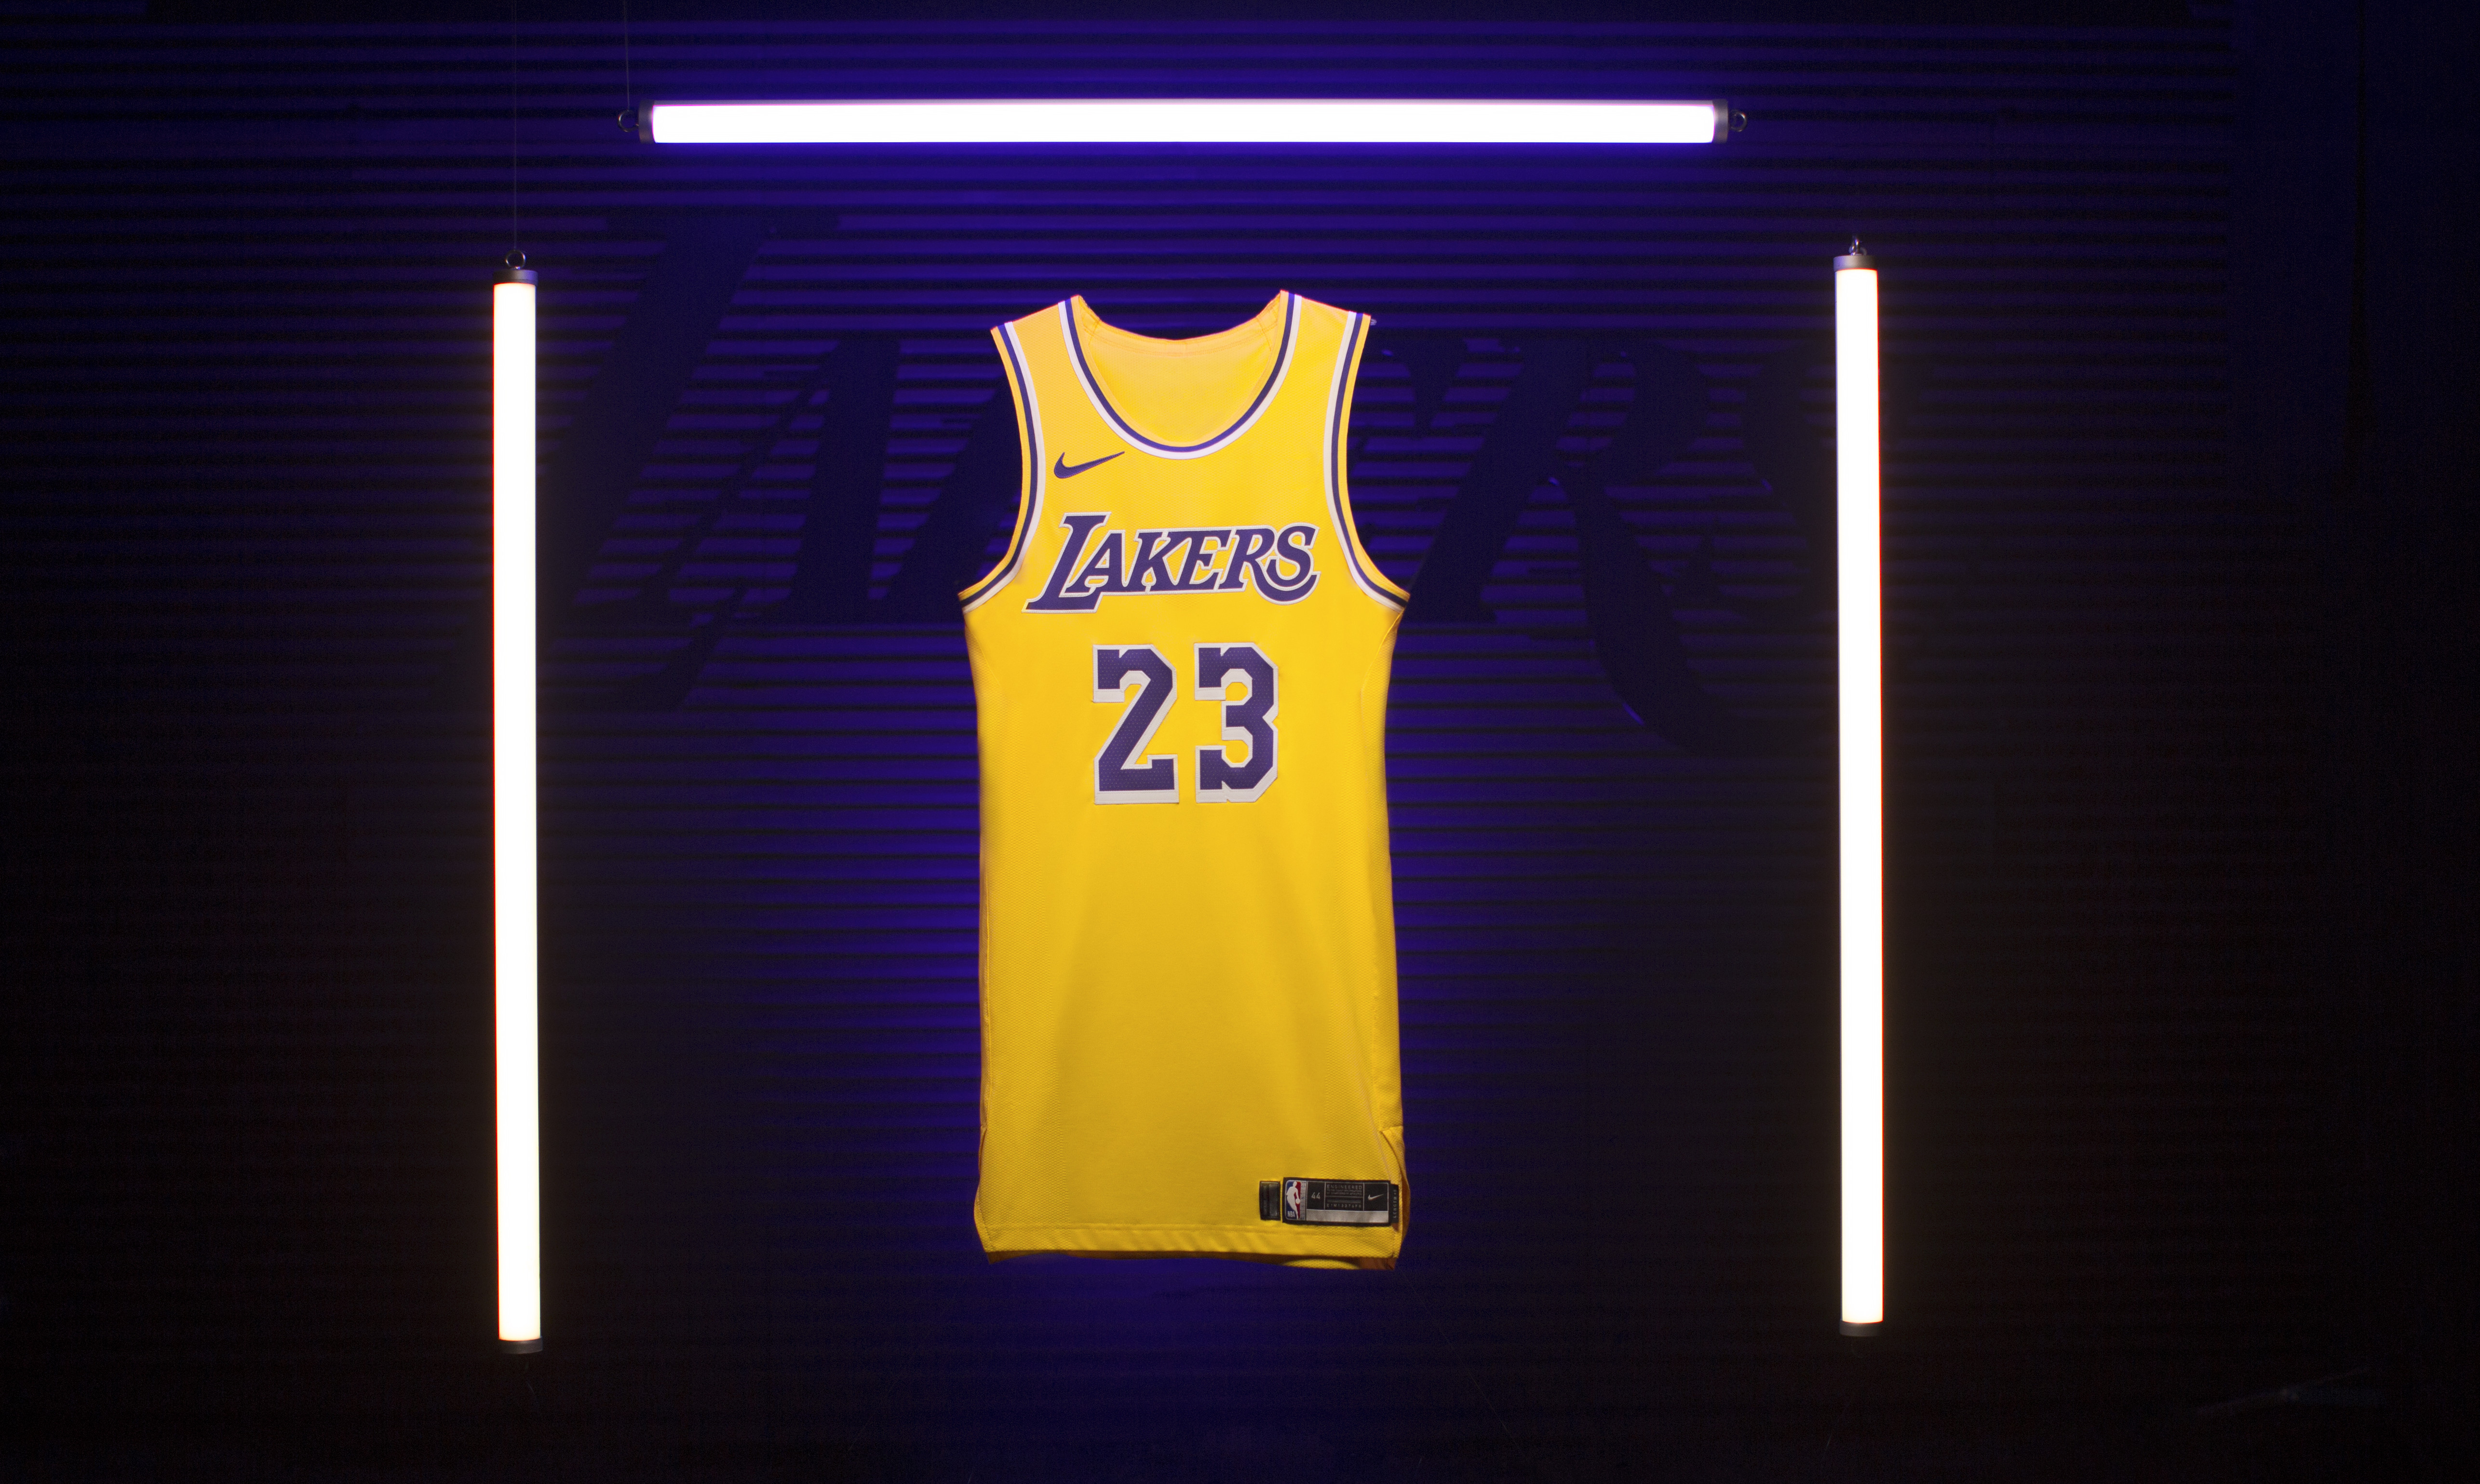 lakers button down jersey